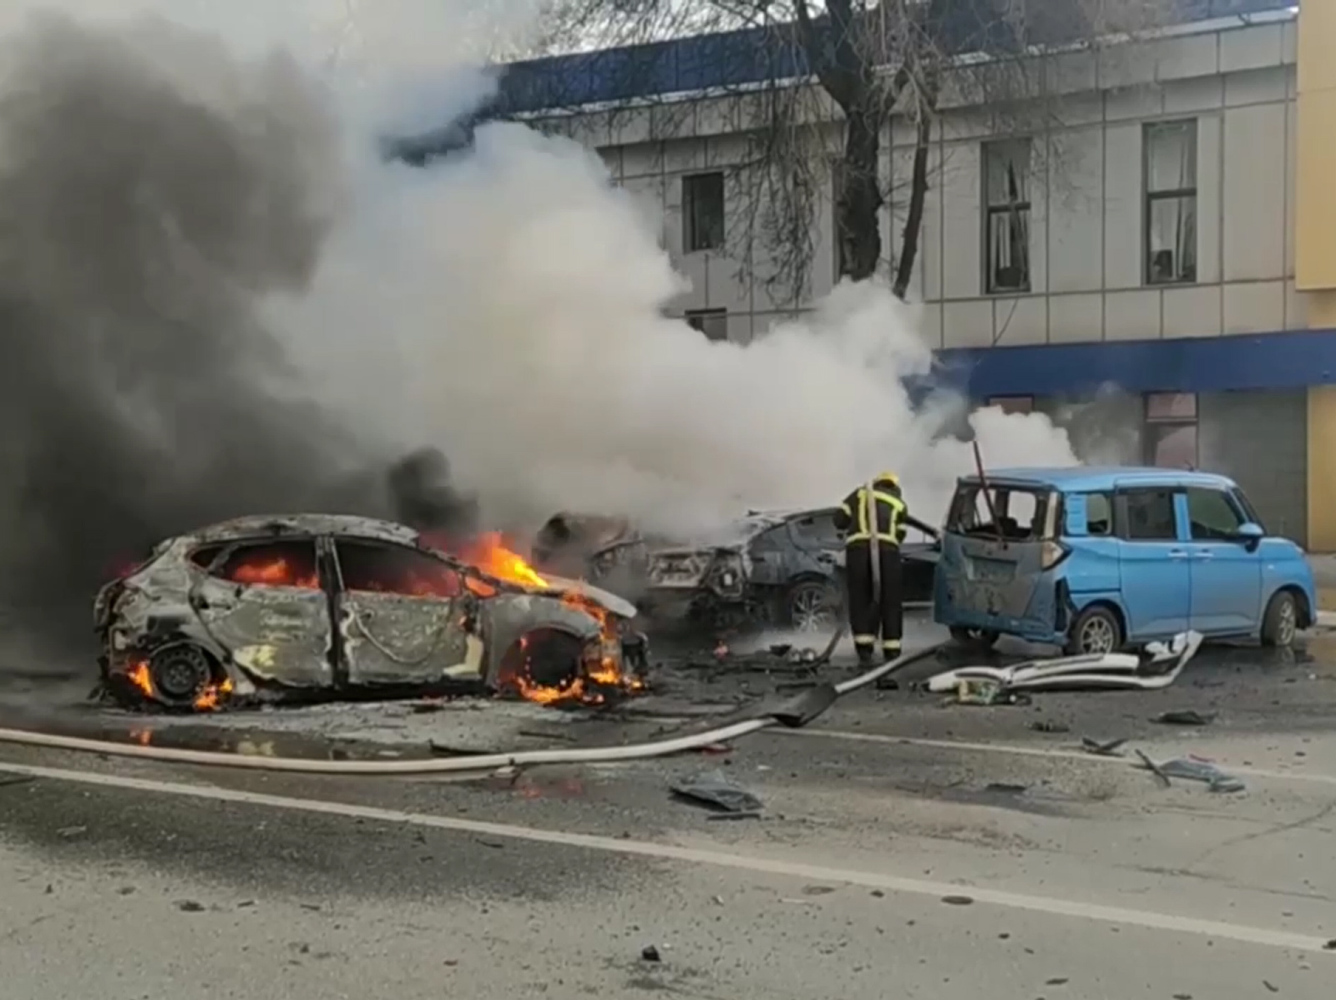 Broken windows, burning cars, street chaos: footage of the aftermath of the shelling of the center of Belgorod